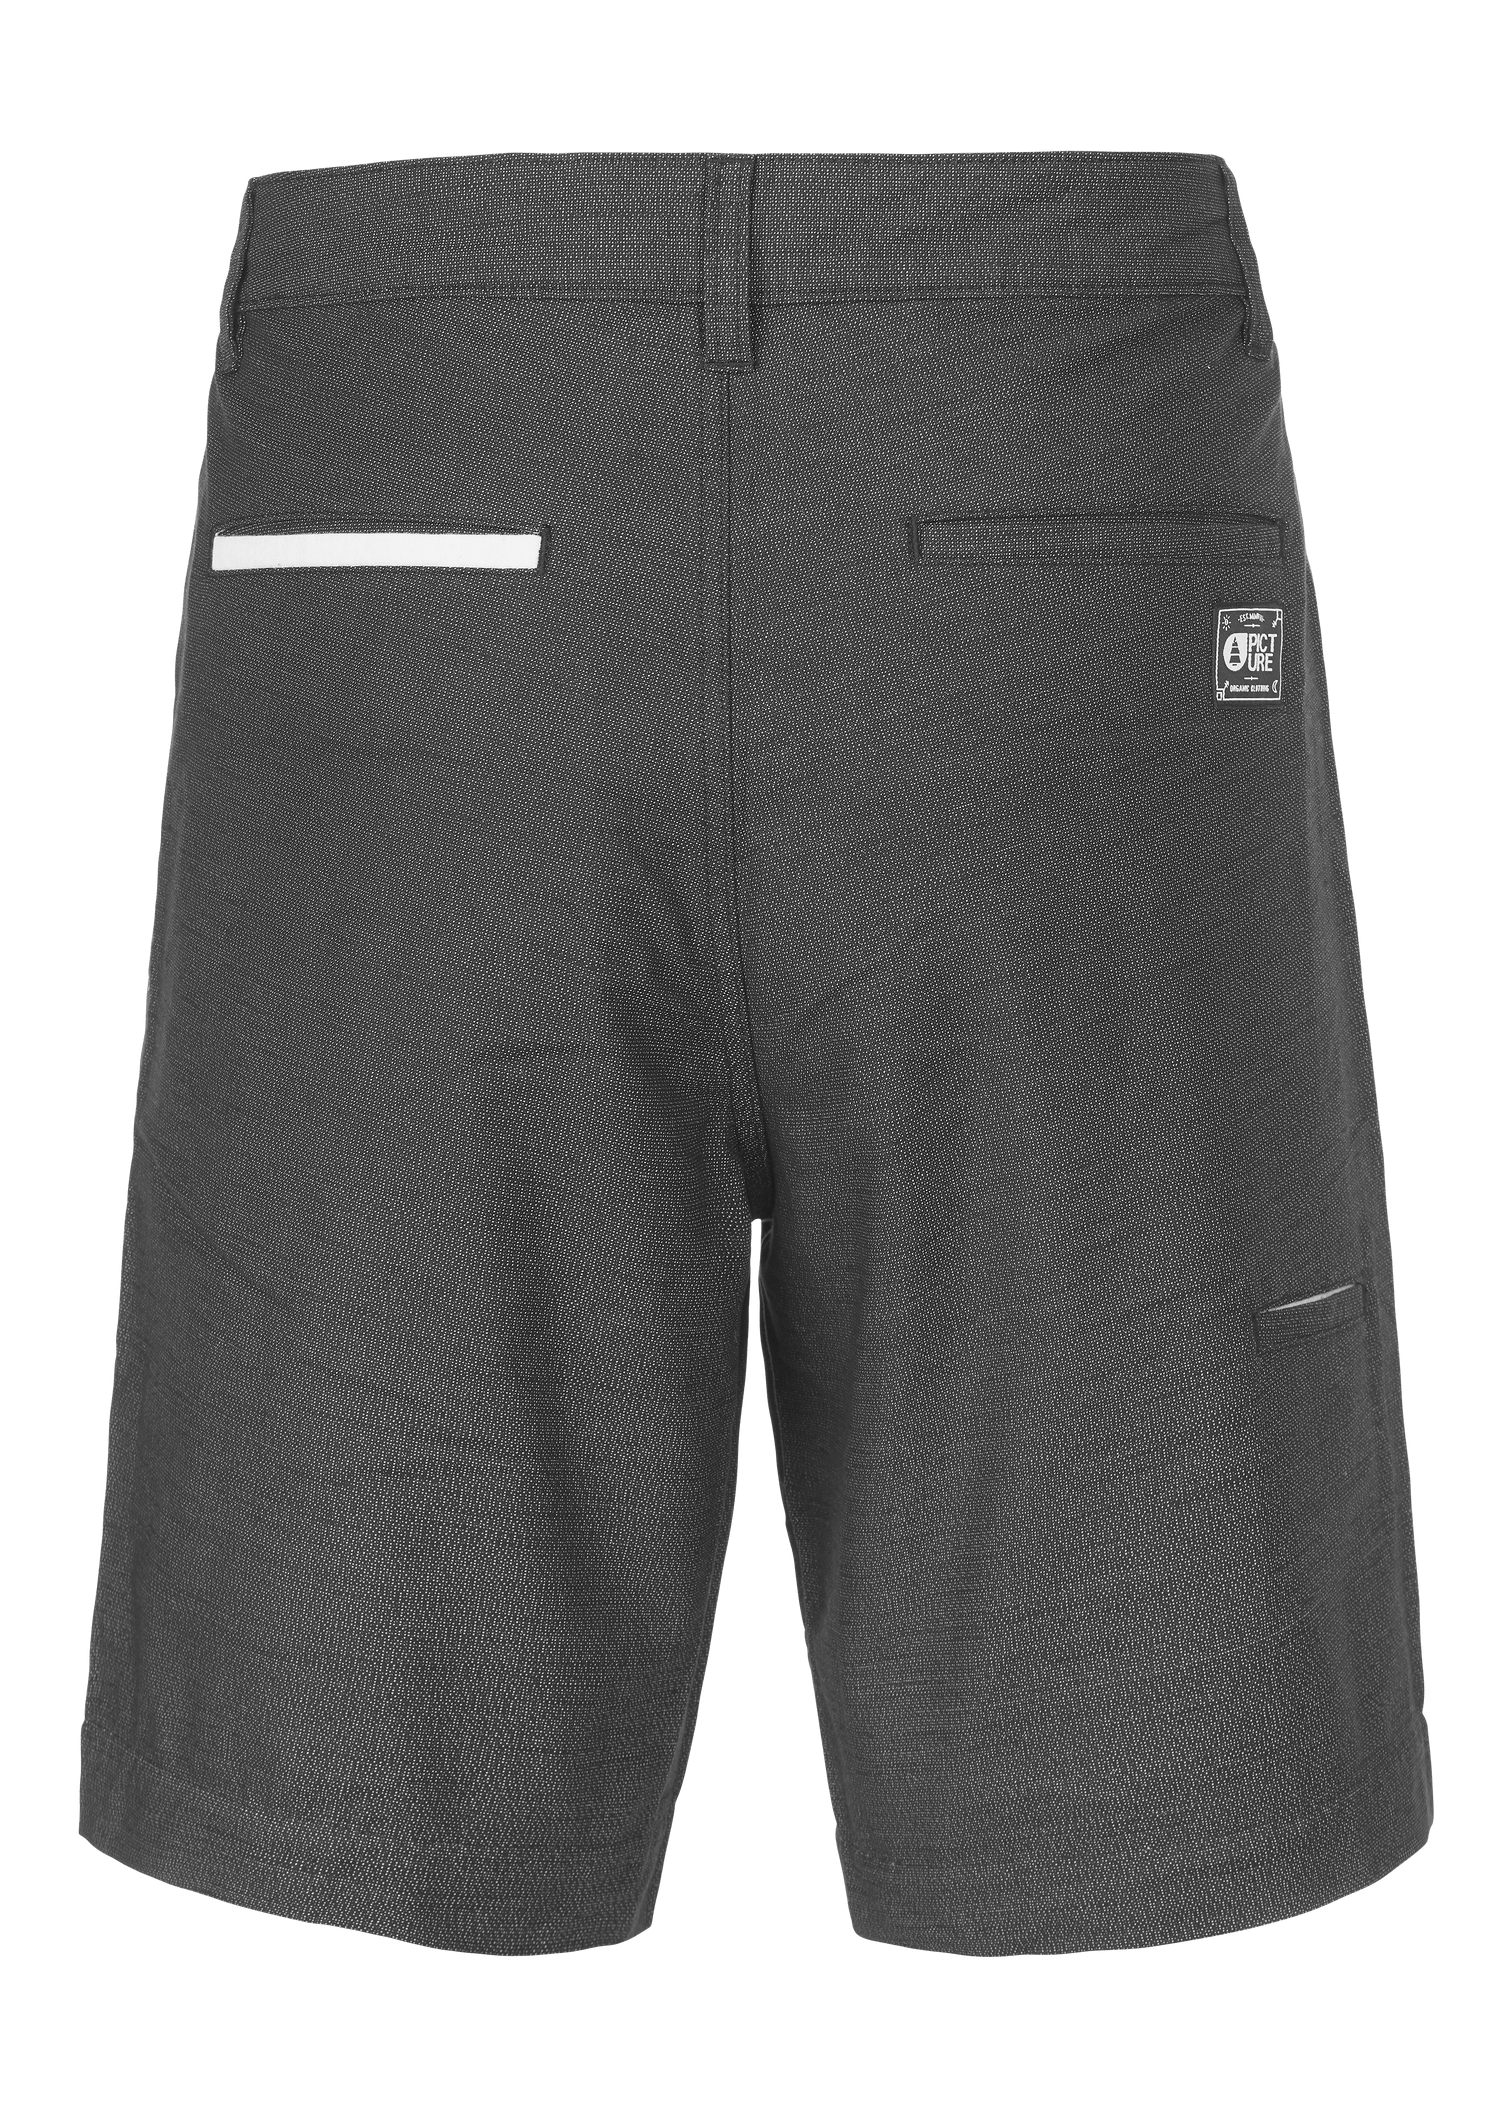 Picture Organic M's Aldos Shorts - Recovery Cotton Black Pants